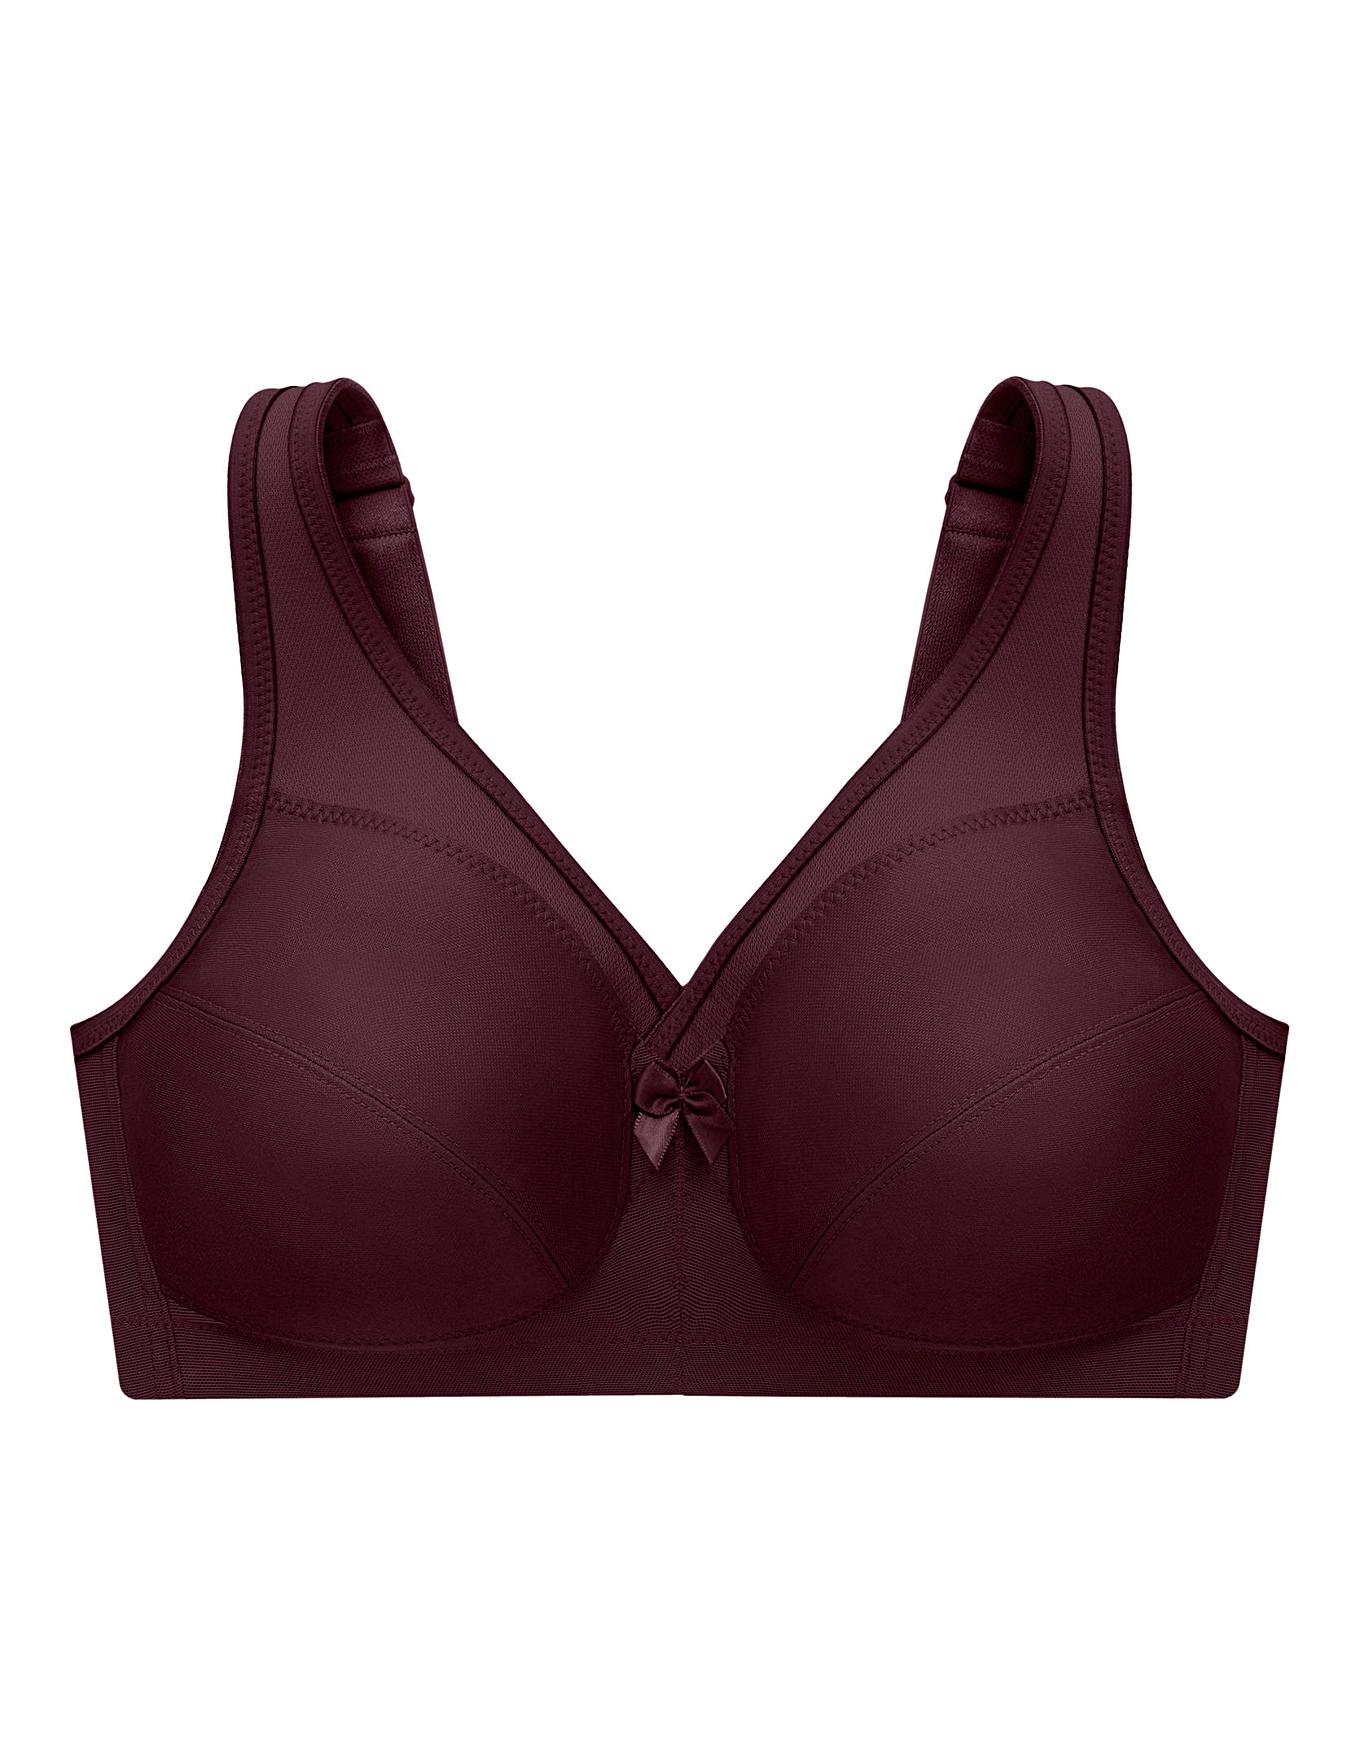 Glamorise Womens MagicLift Active Support Wirefree Bra 1005 Wine 44G